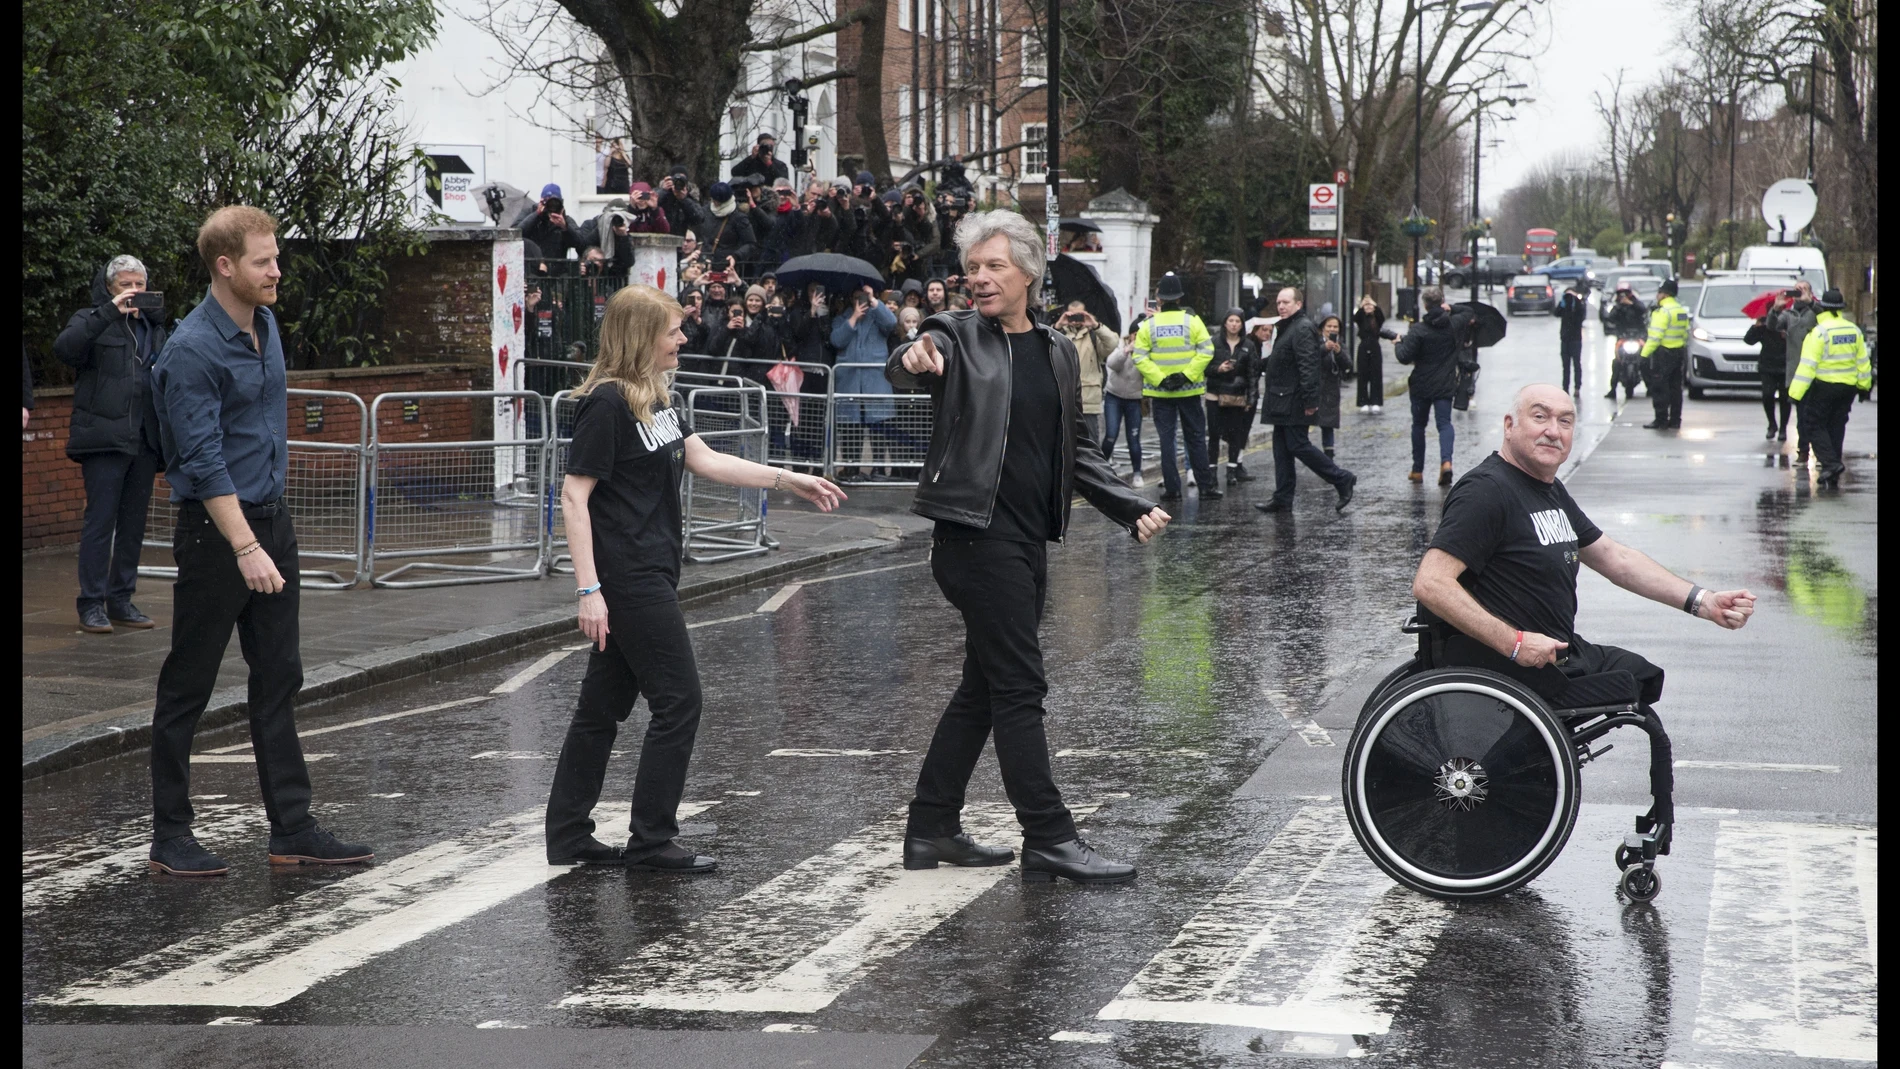 28/02/2020. London, United Kingdom: Prince Harry, The Duke of Sussex, along with Jon Bon Jovi and members of the Invictus Games Choir, re-create the iconic Beatles Abbey Road album cover photograph after recording a special single in aid of the Invictus Games Foundation at the Abbey Road Studios in London. (Stephen Lock / i-Images / Contacto)28/02/2020 ONLY FOR USE IN SPAIN